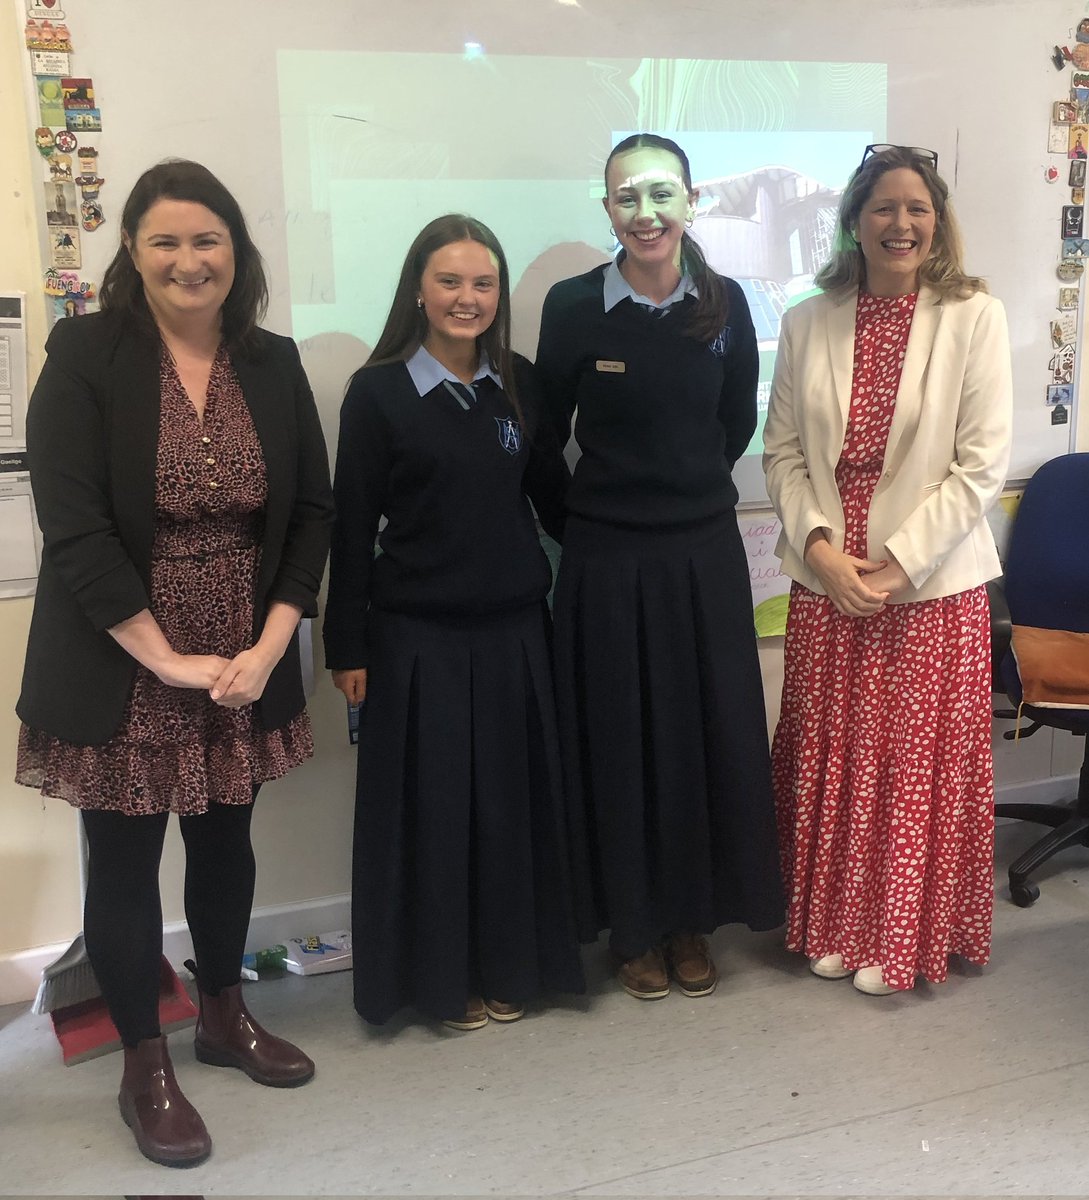 Many thanks to Melissa and Claire from @NursingMid_UL for meeting with some of #ASM's Sixth Years yesterday. A brilliant presentation that satisfied the huge interest in nursing as a potential career among our final year students. #Careers #Guidance